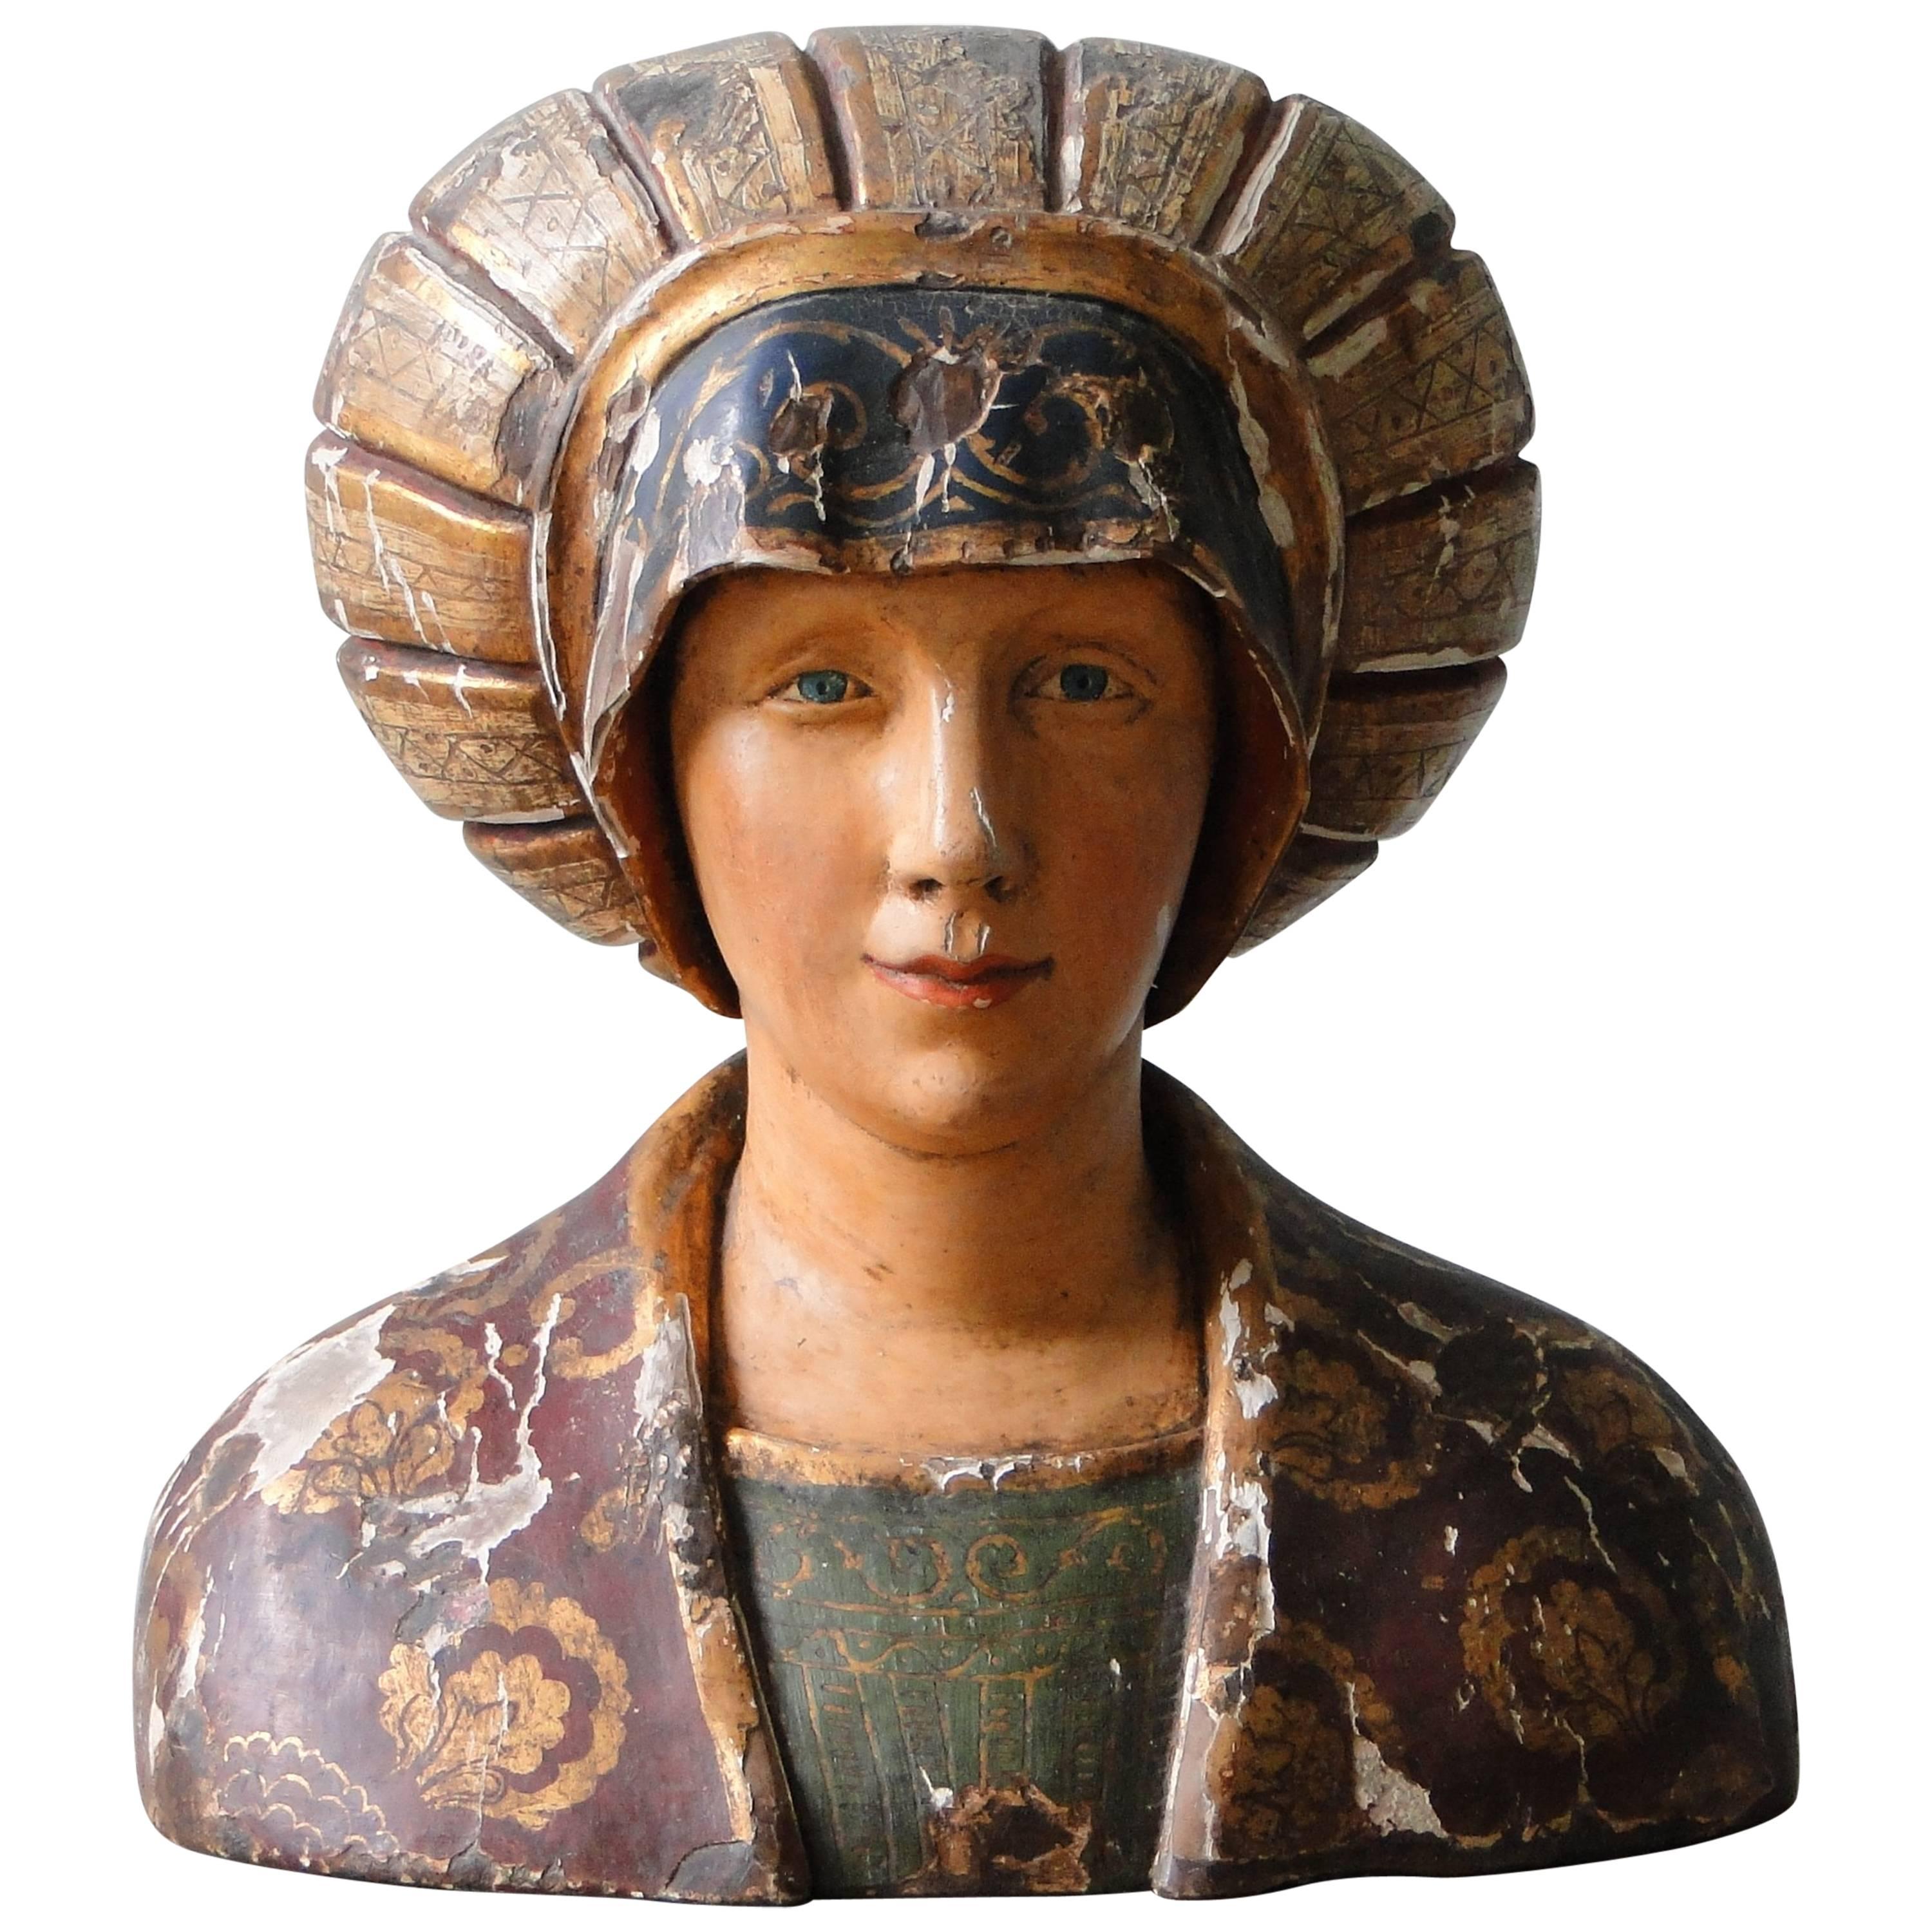 Wooden Carved Statue or Bust from the 16th Century